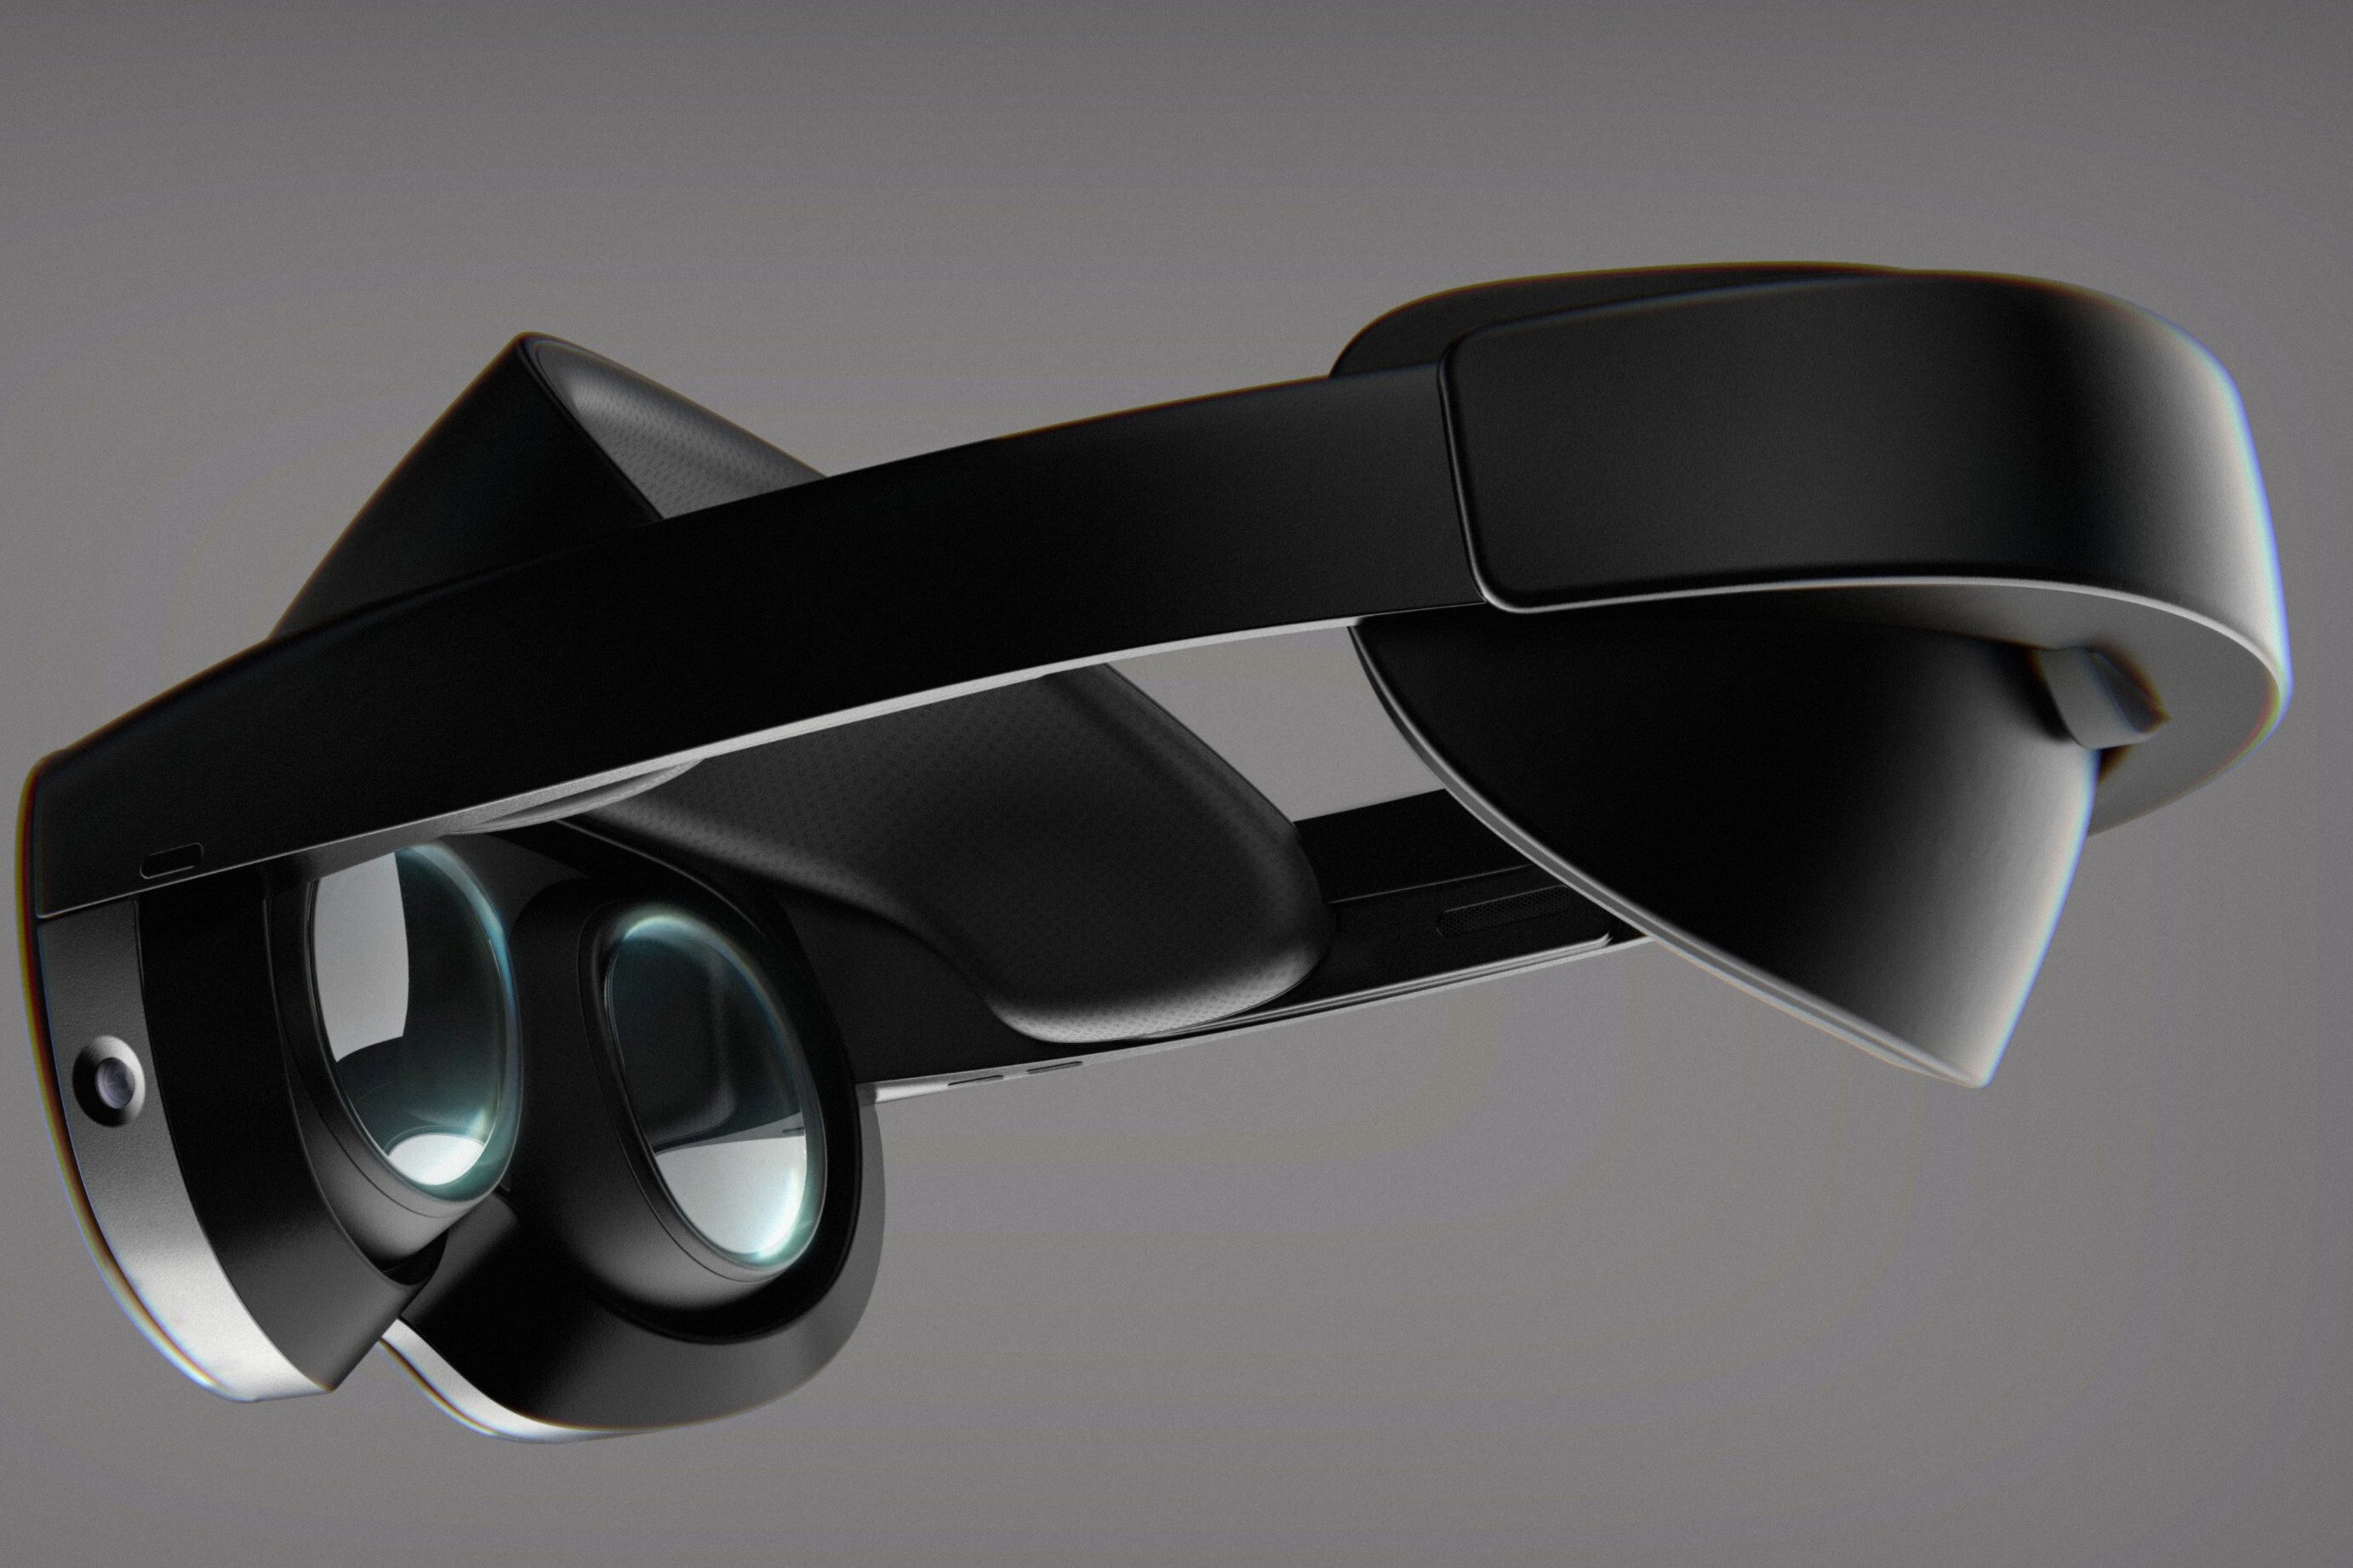 Meta's Project Cambria Concept Rendering - Apple's Mixed Reality Headset Coming to Market and Introduced